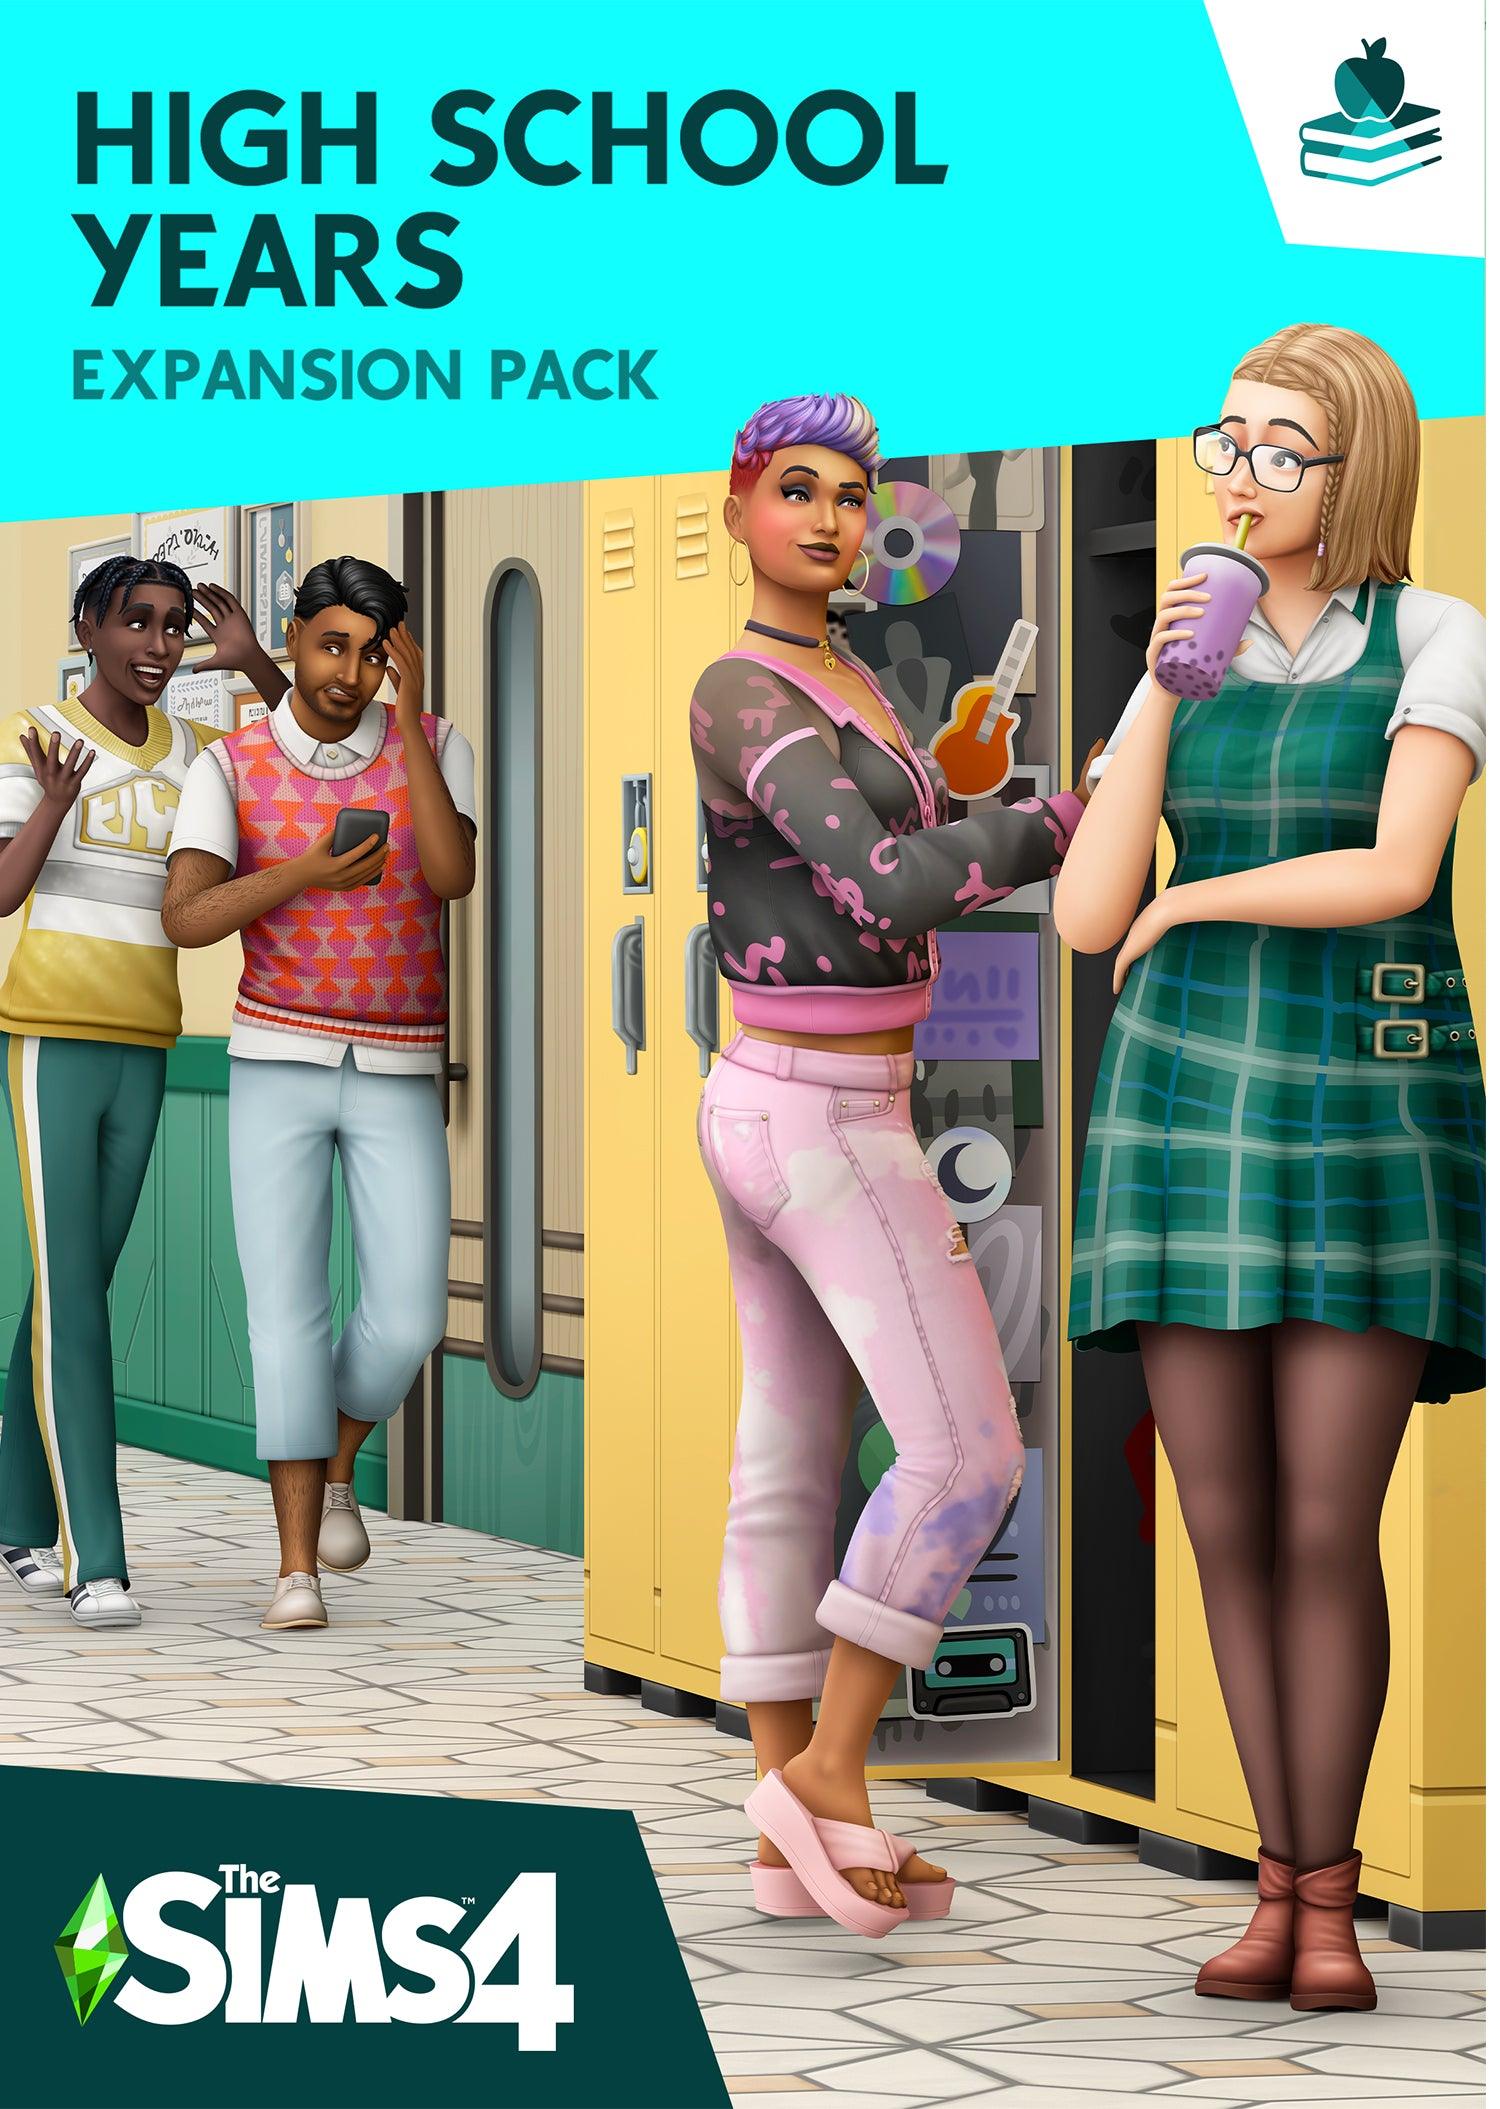 The Sims 4 High School Years - Want a New Gadget